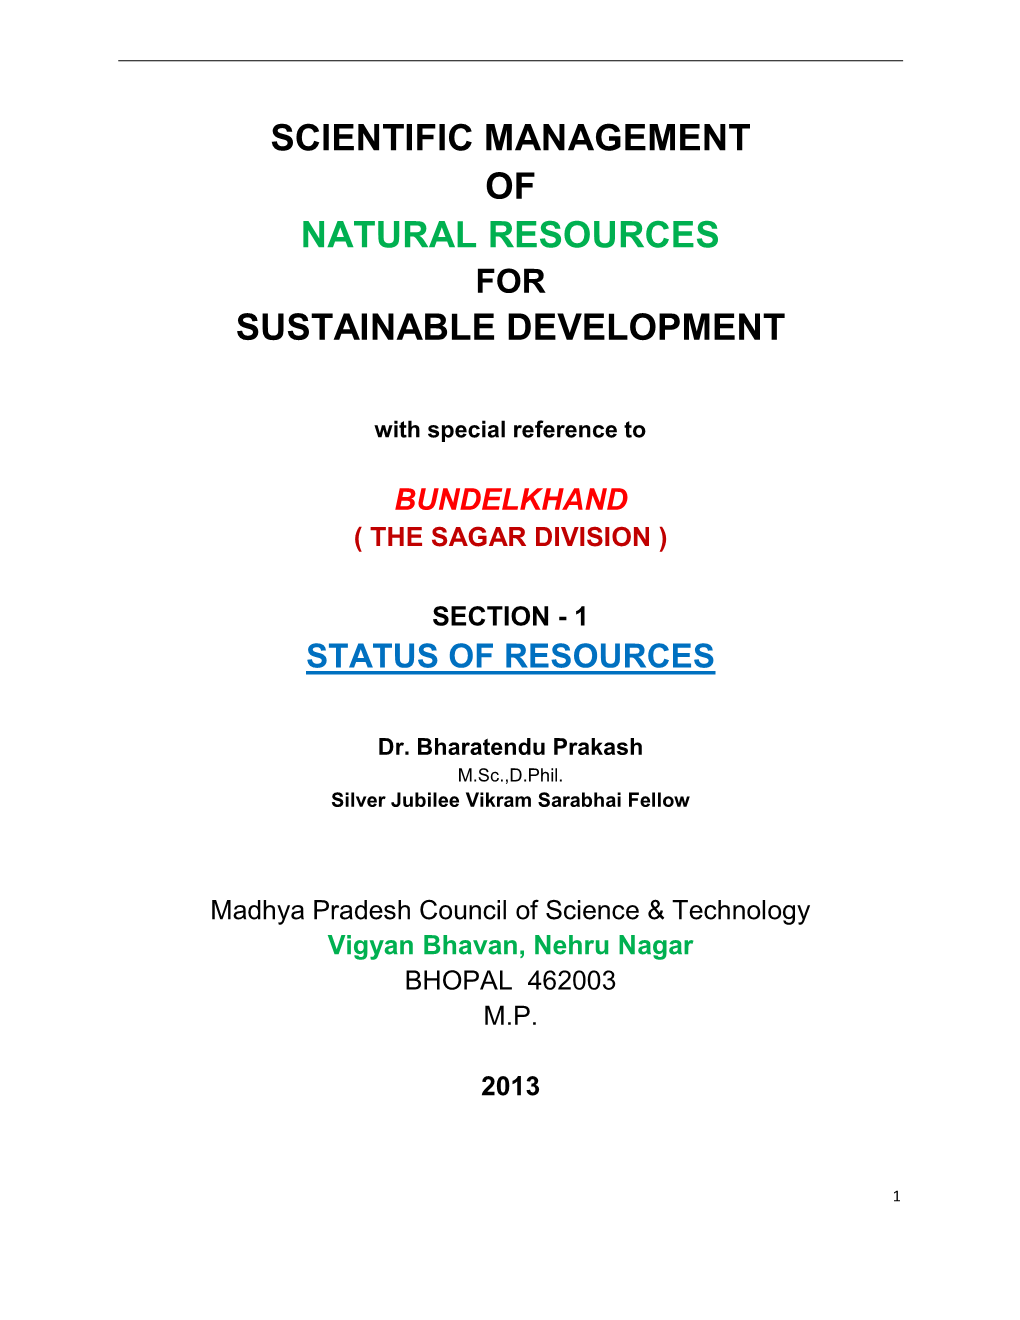 Scientific Management of Natural Resources for Sustainable Development